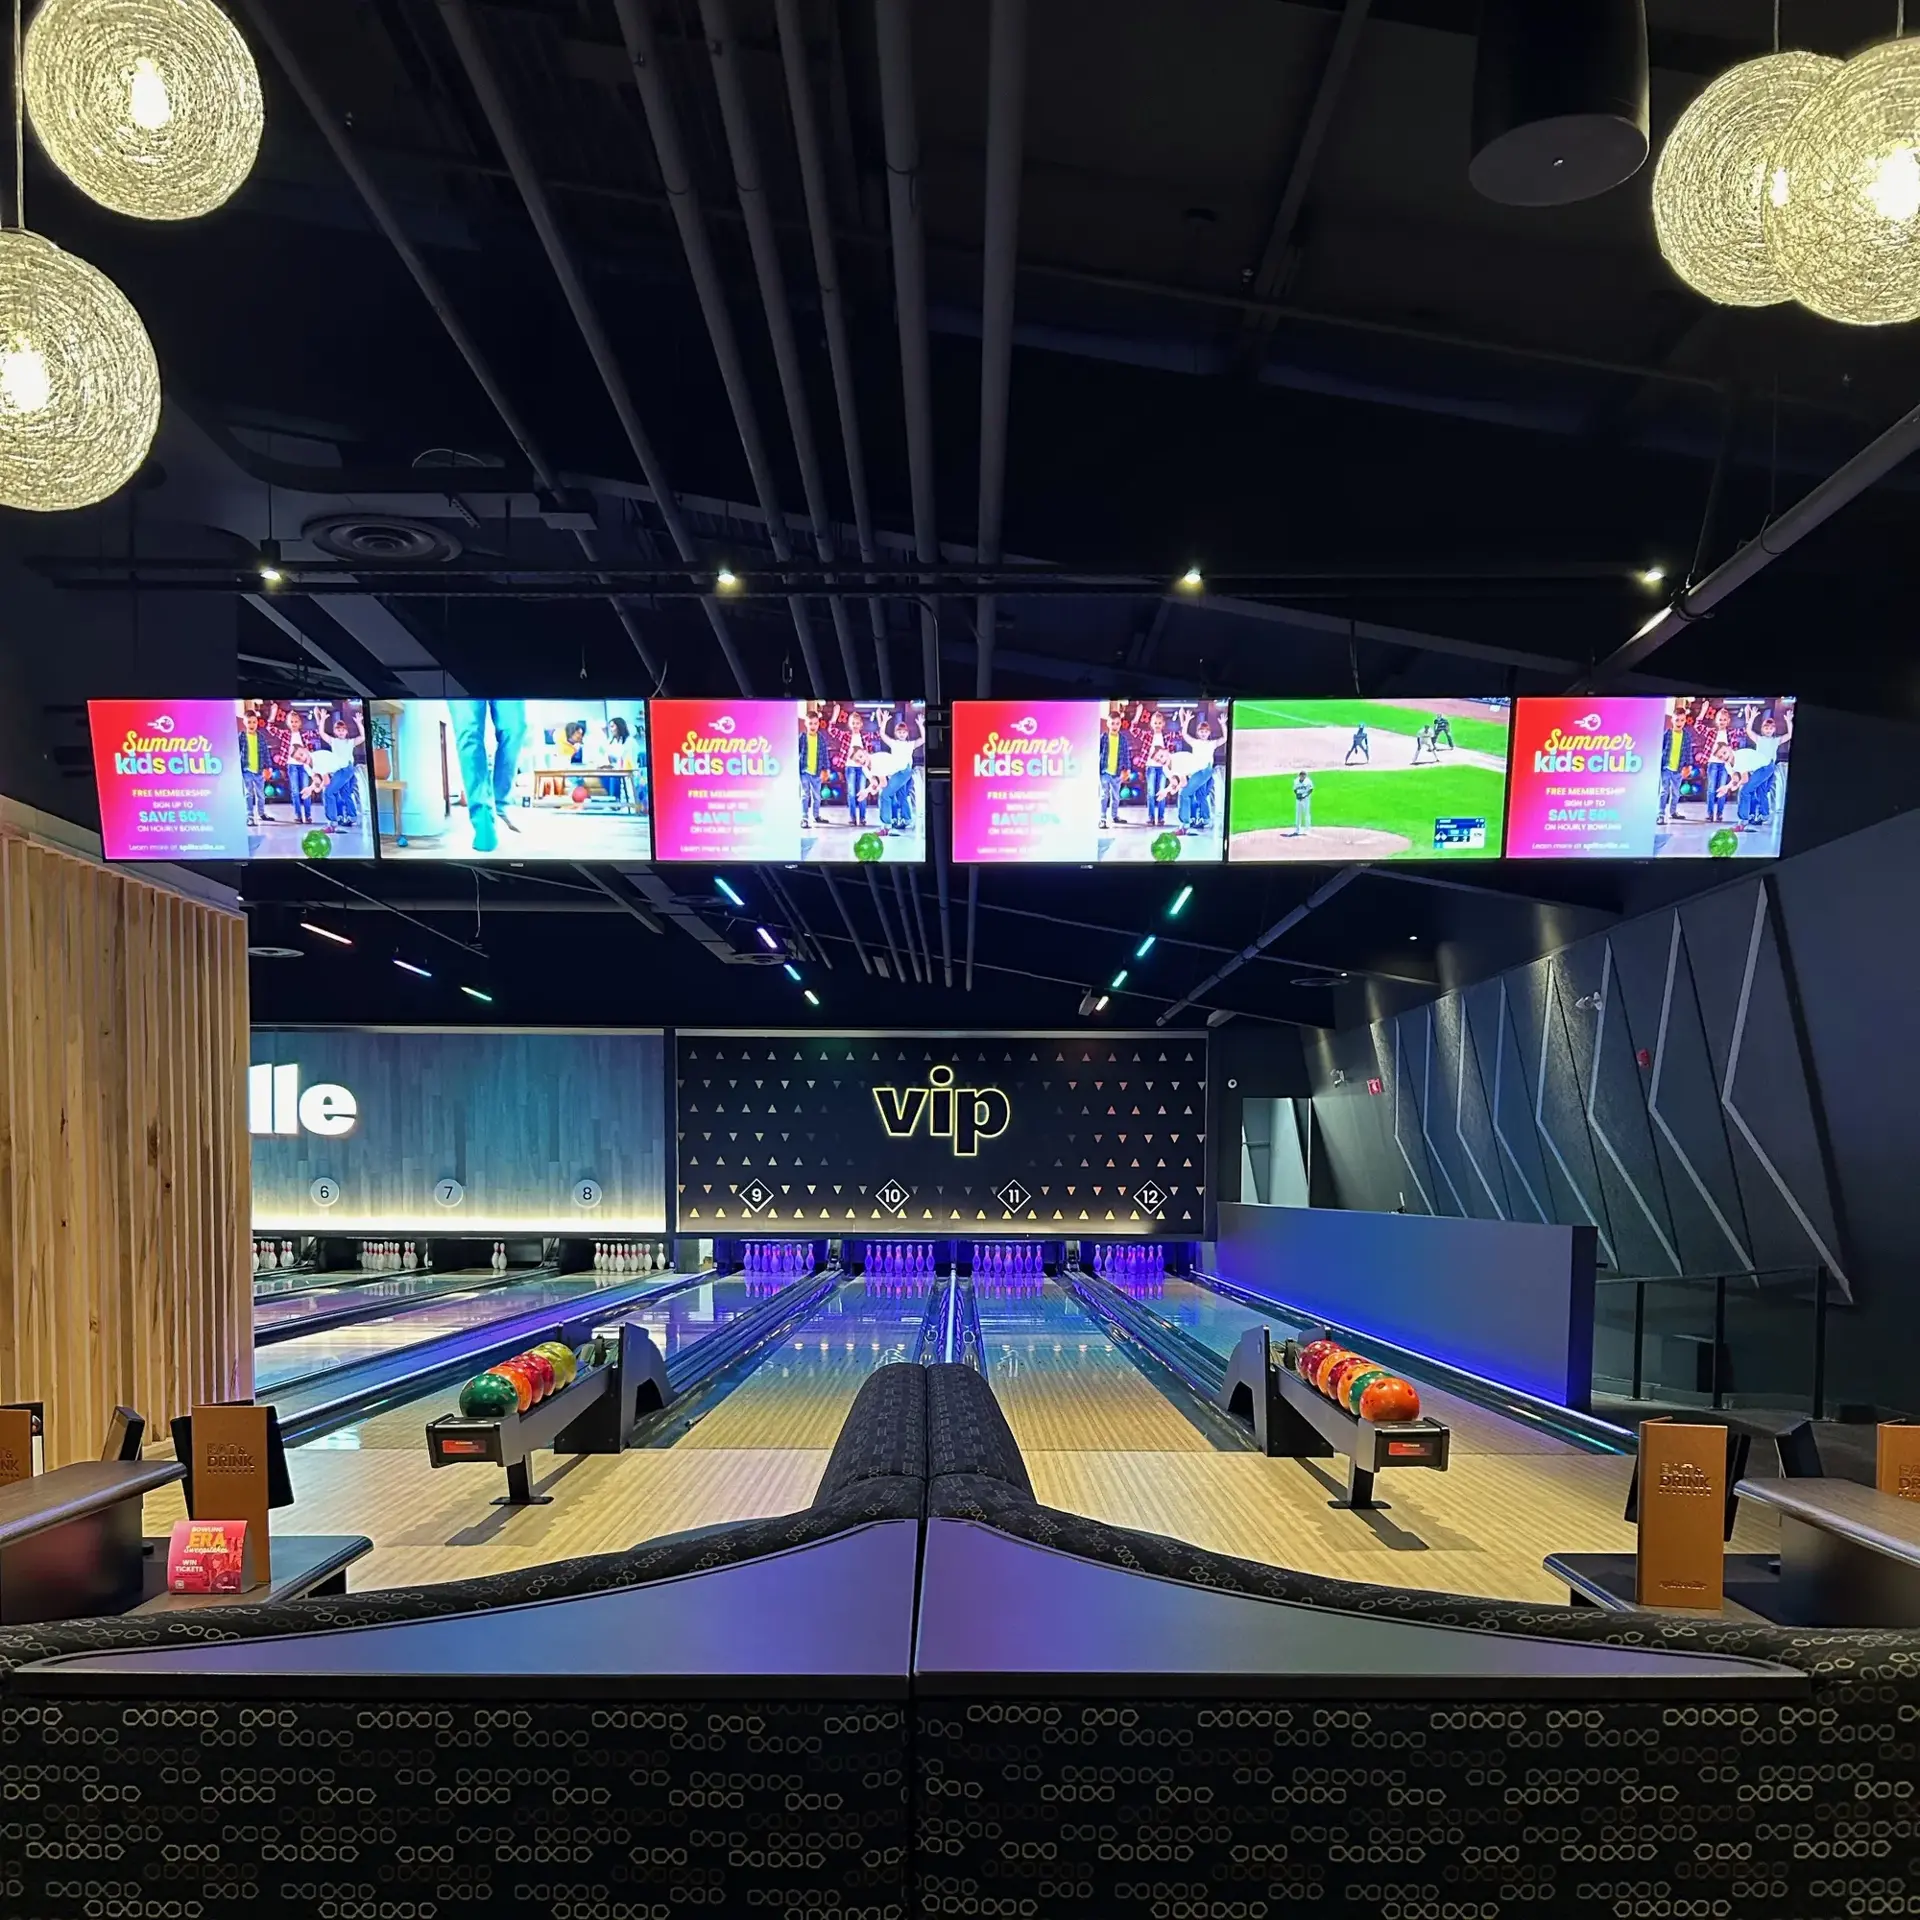 Elevate your bowling experience with VIP lanes